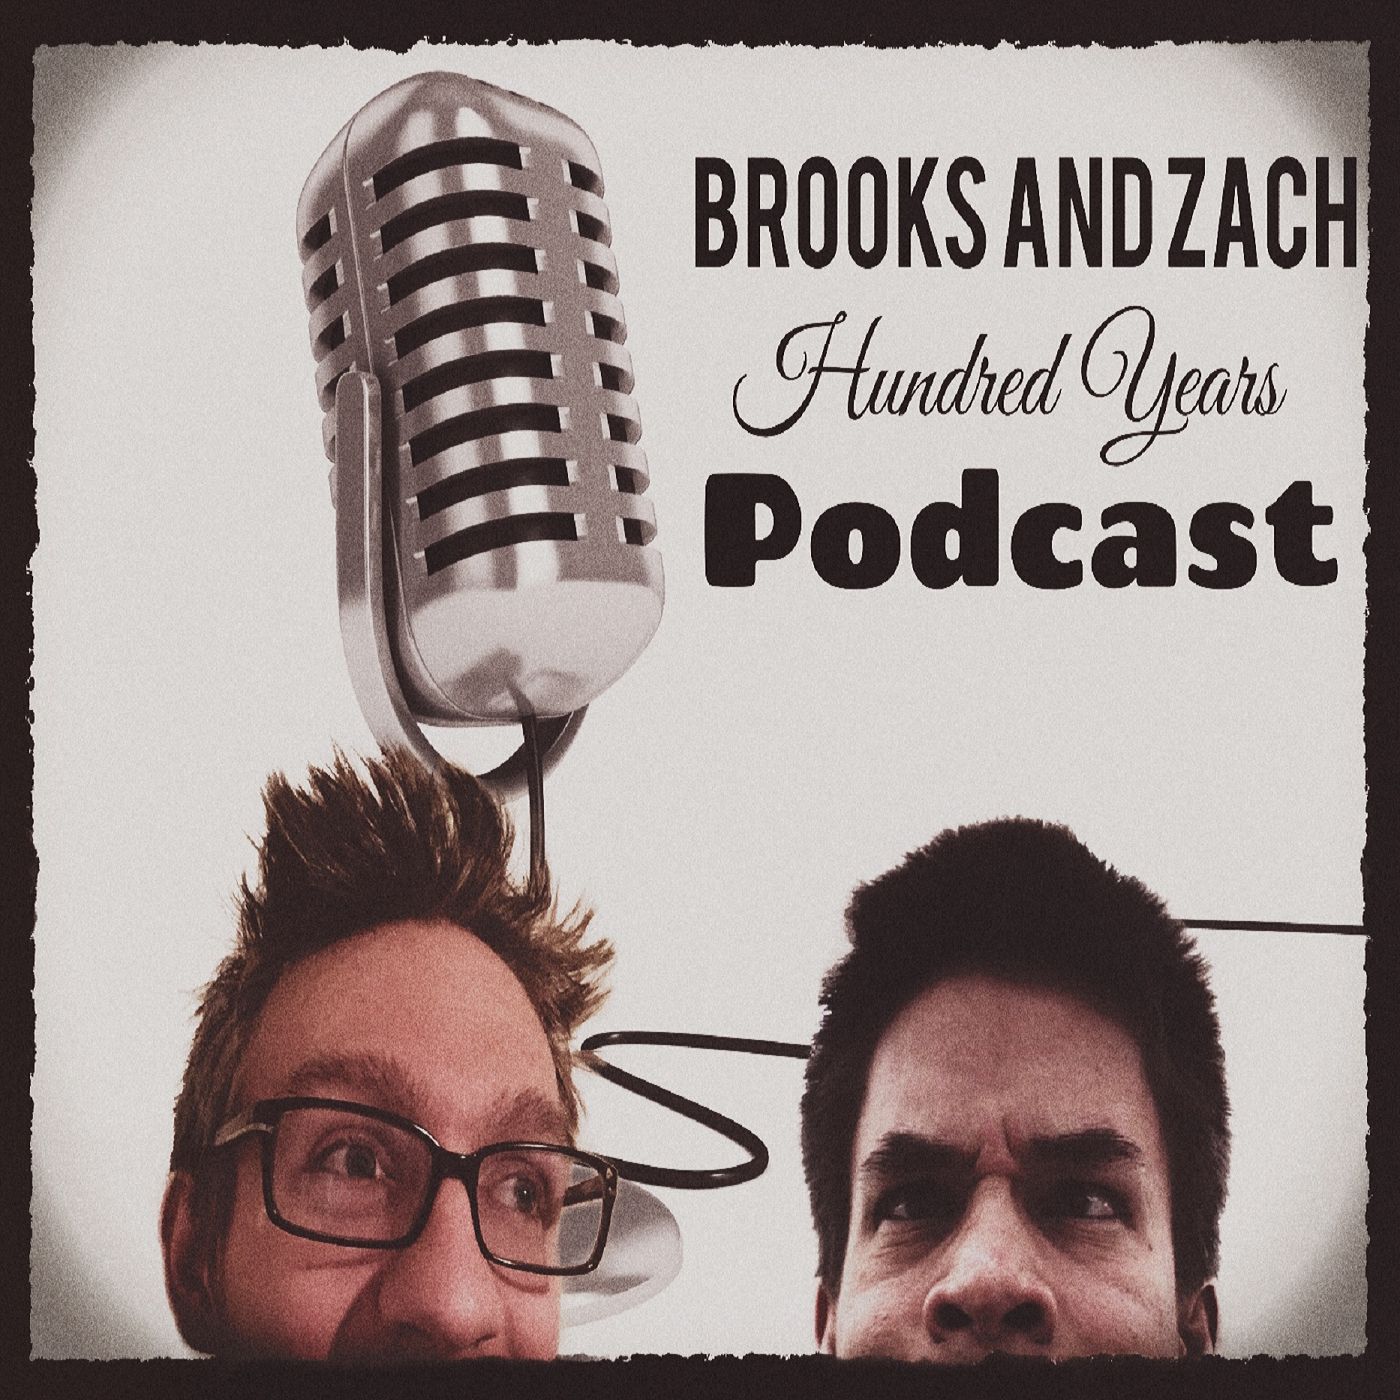 Brooks and Zach Hundred Years Podcast